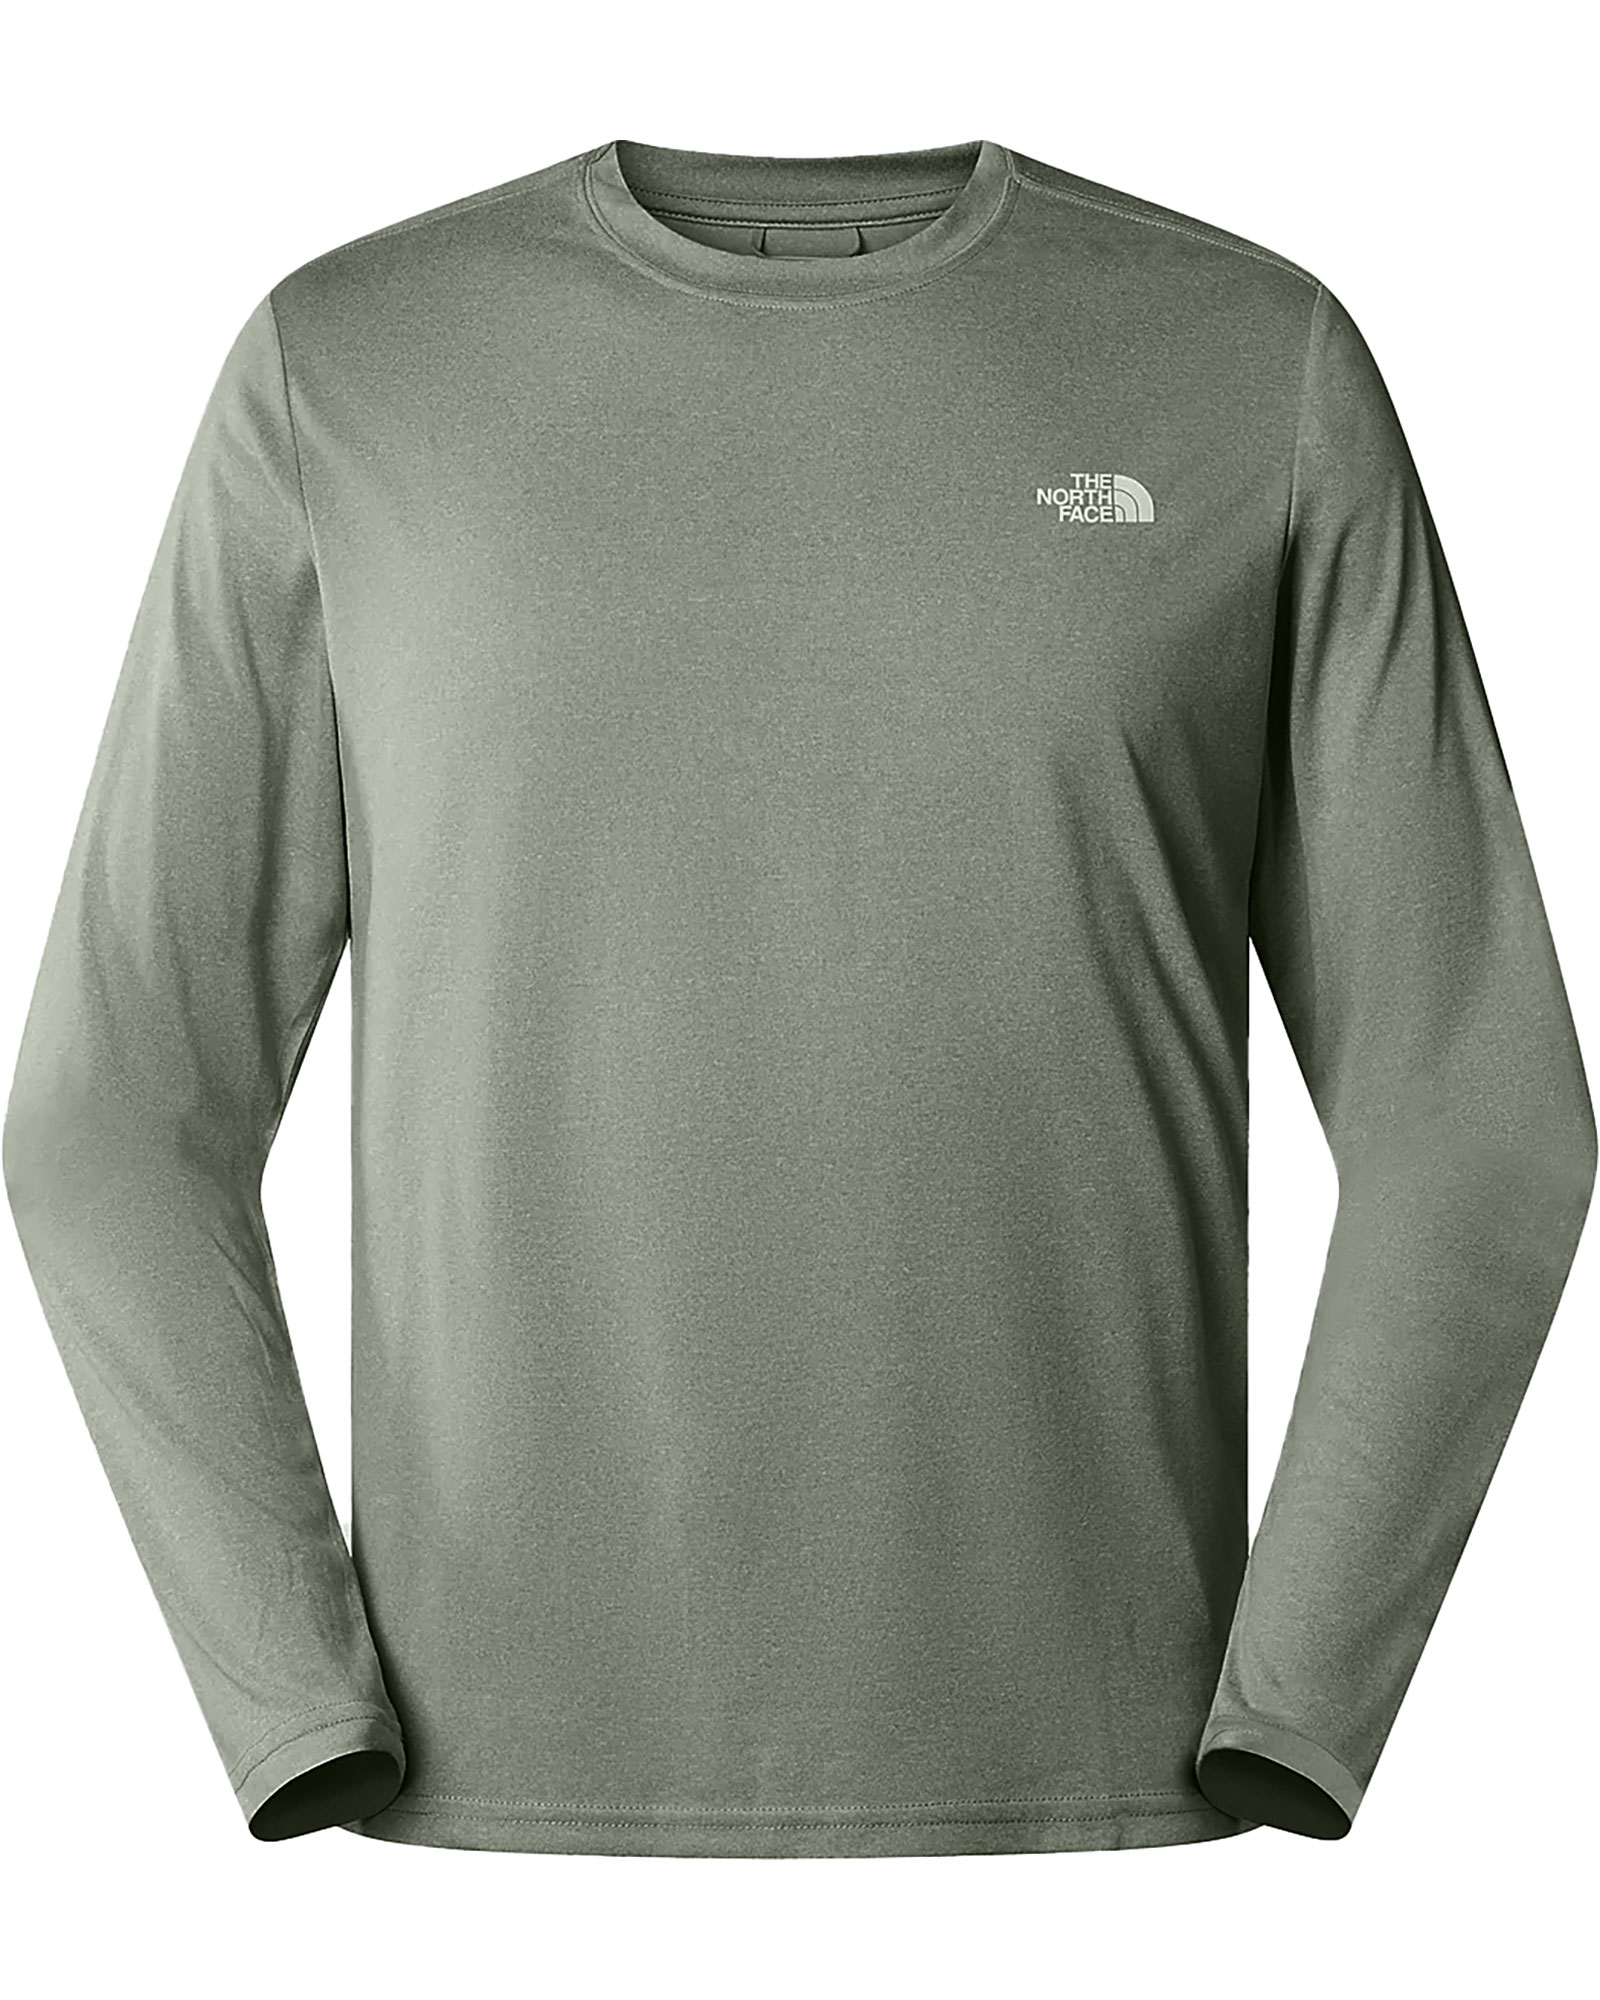 The North Face Men’s Reaxion Amp Long Sleeved Crew T Shirt - New Taupe Green Heather M